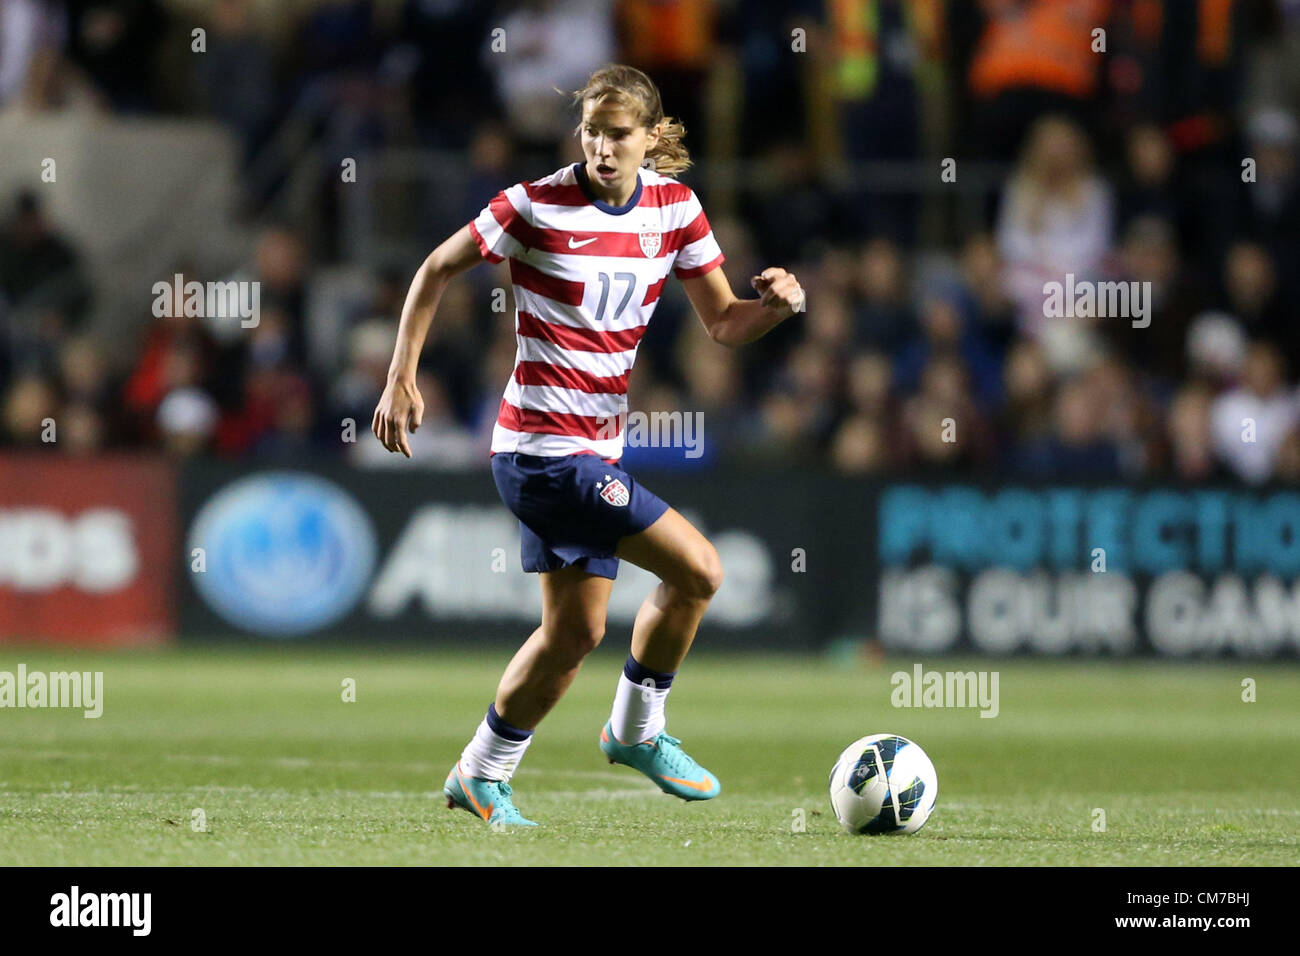 20.10.2012. Chicago, USA.  Tobin Heath (USA). The United States Women's National Team played the Germany Women's National Team at Toyota Park in Bridgeview, Illinois in a women's international friendly soccer match. The game ended in a 1-1 tie. Stock Photo